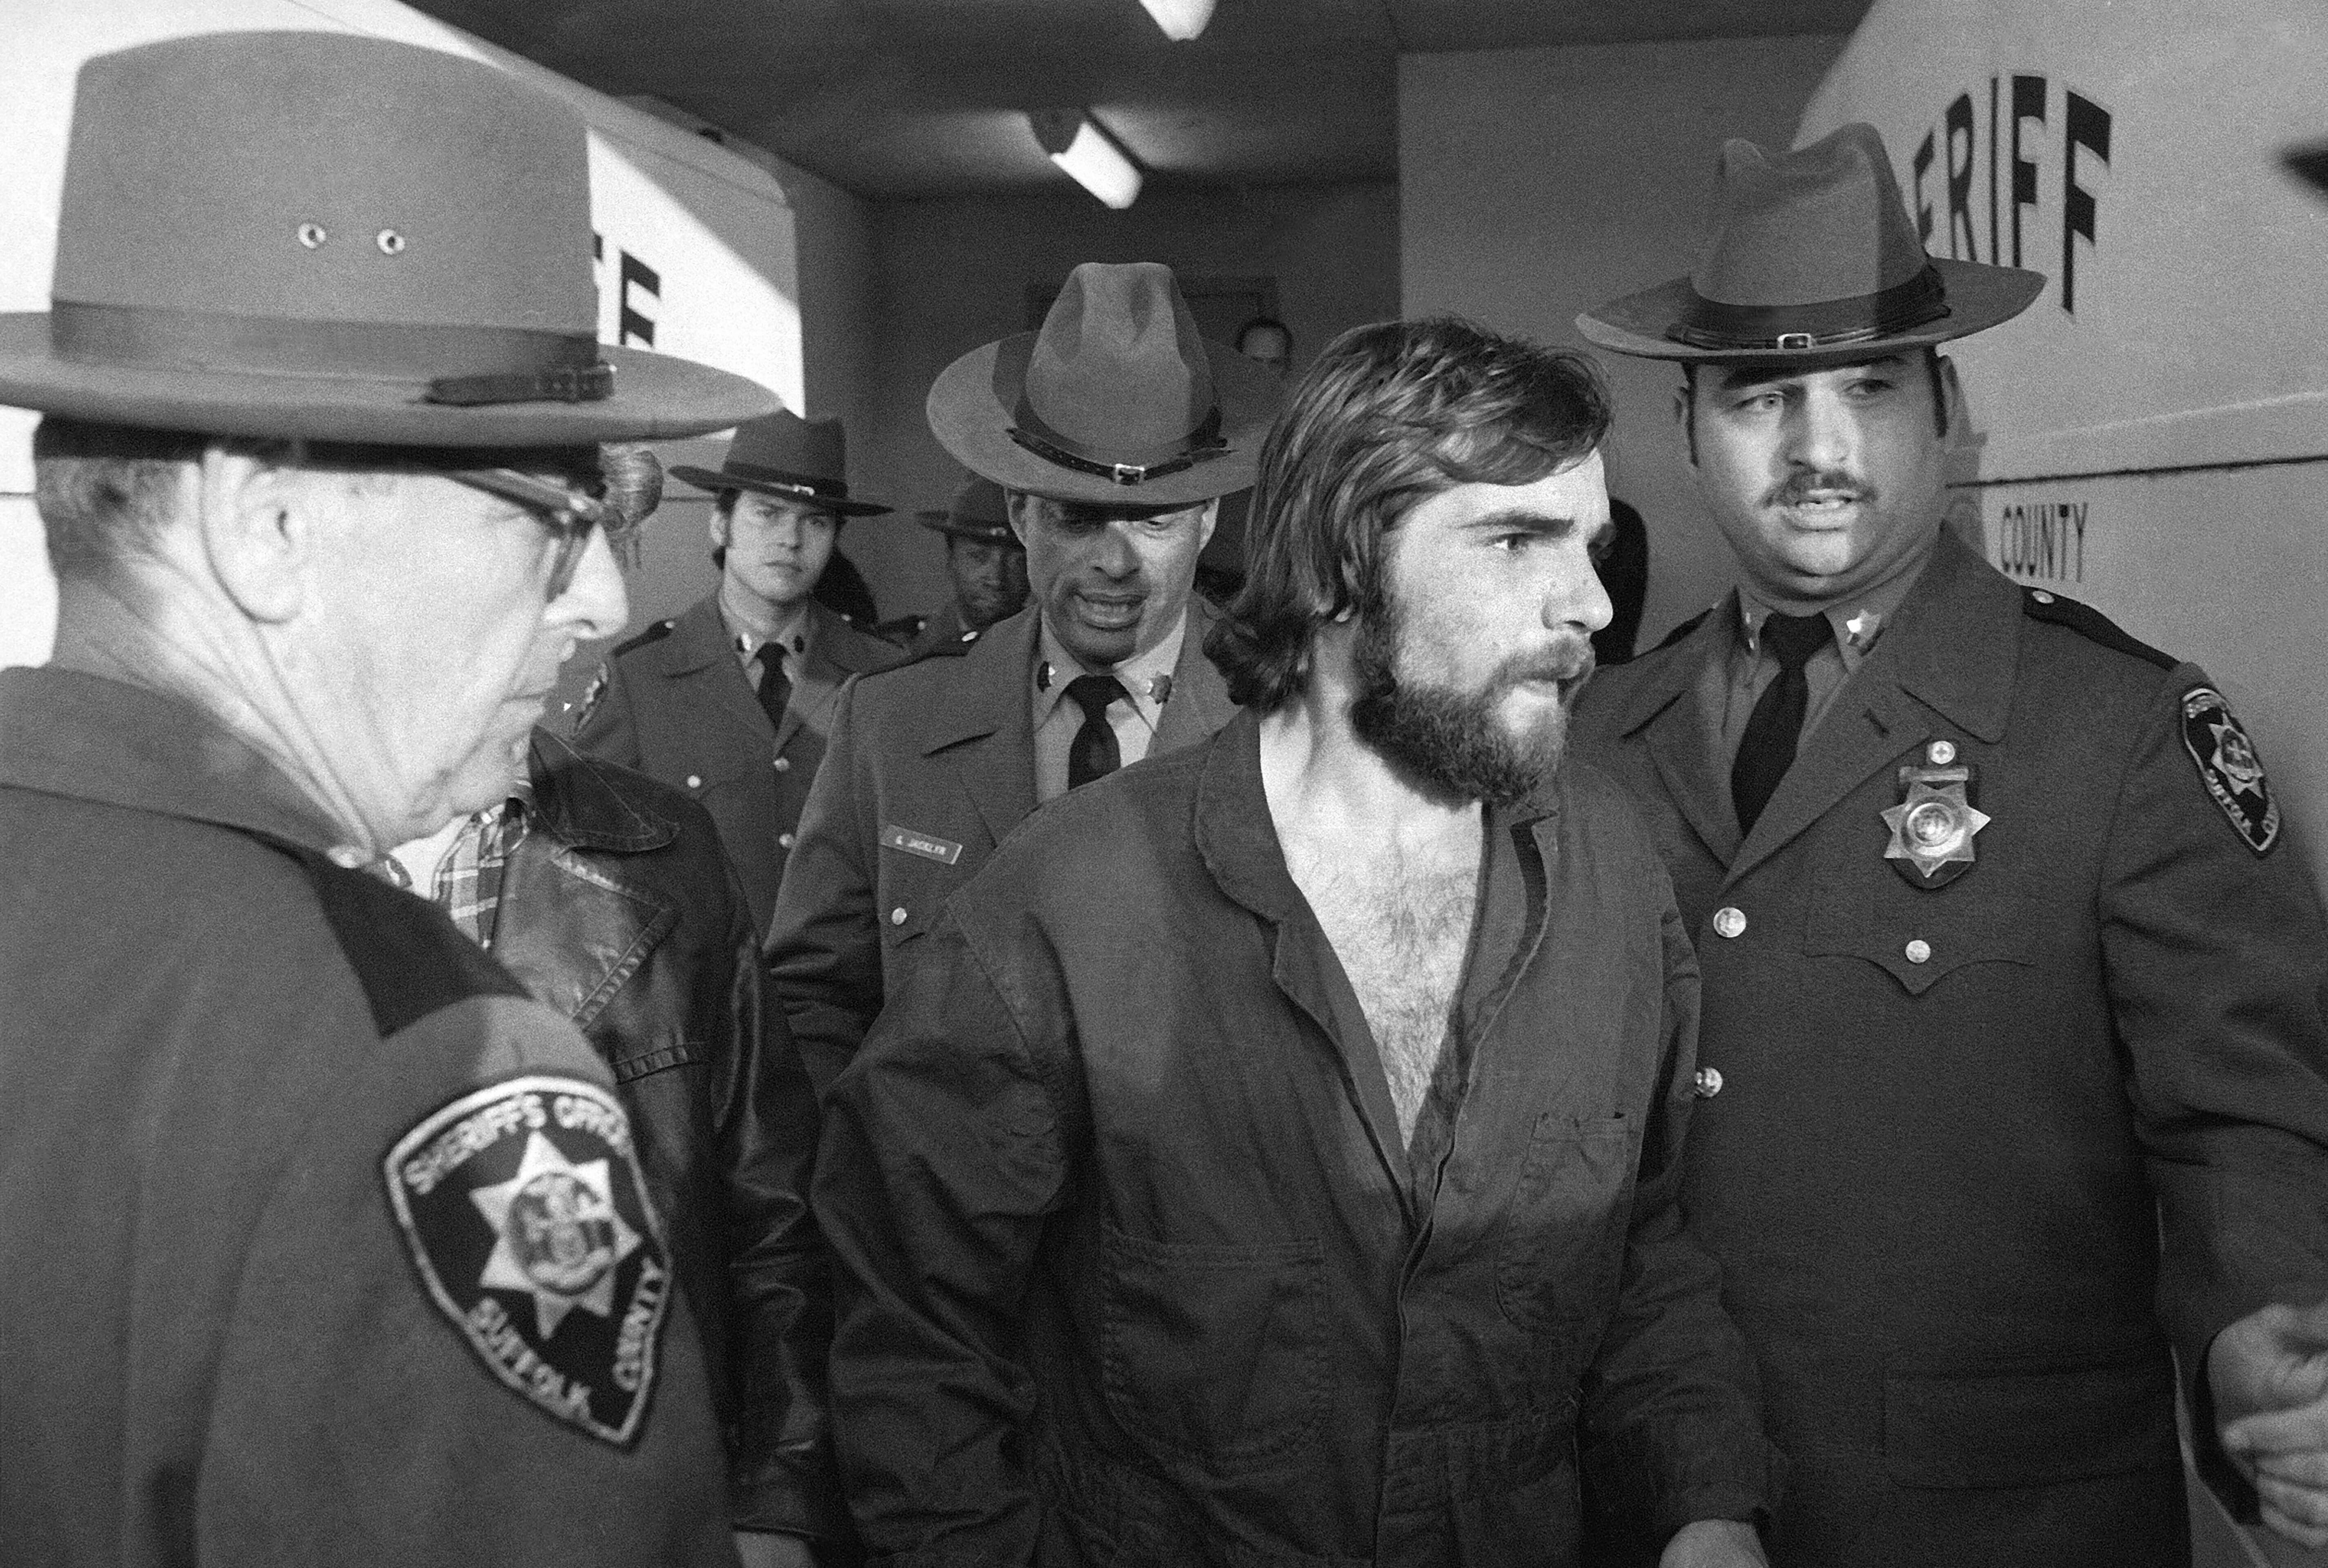 Ron DeFeo Jr murdered his entire family at their home in Amityville on Long Island in 1974